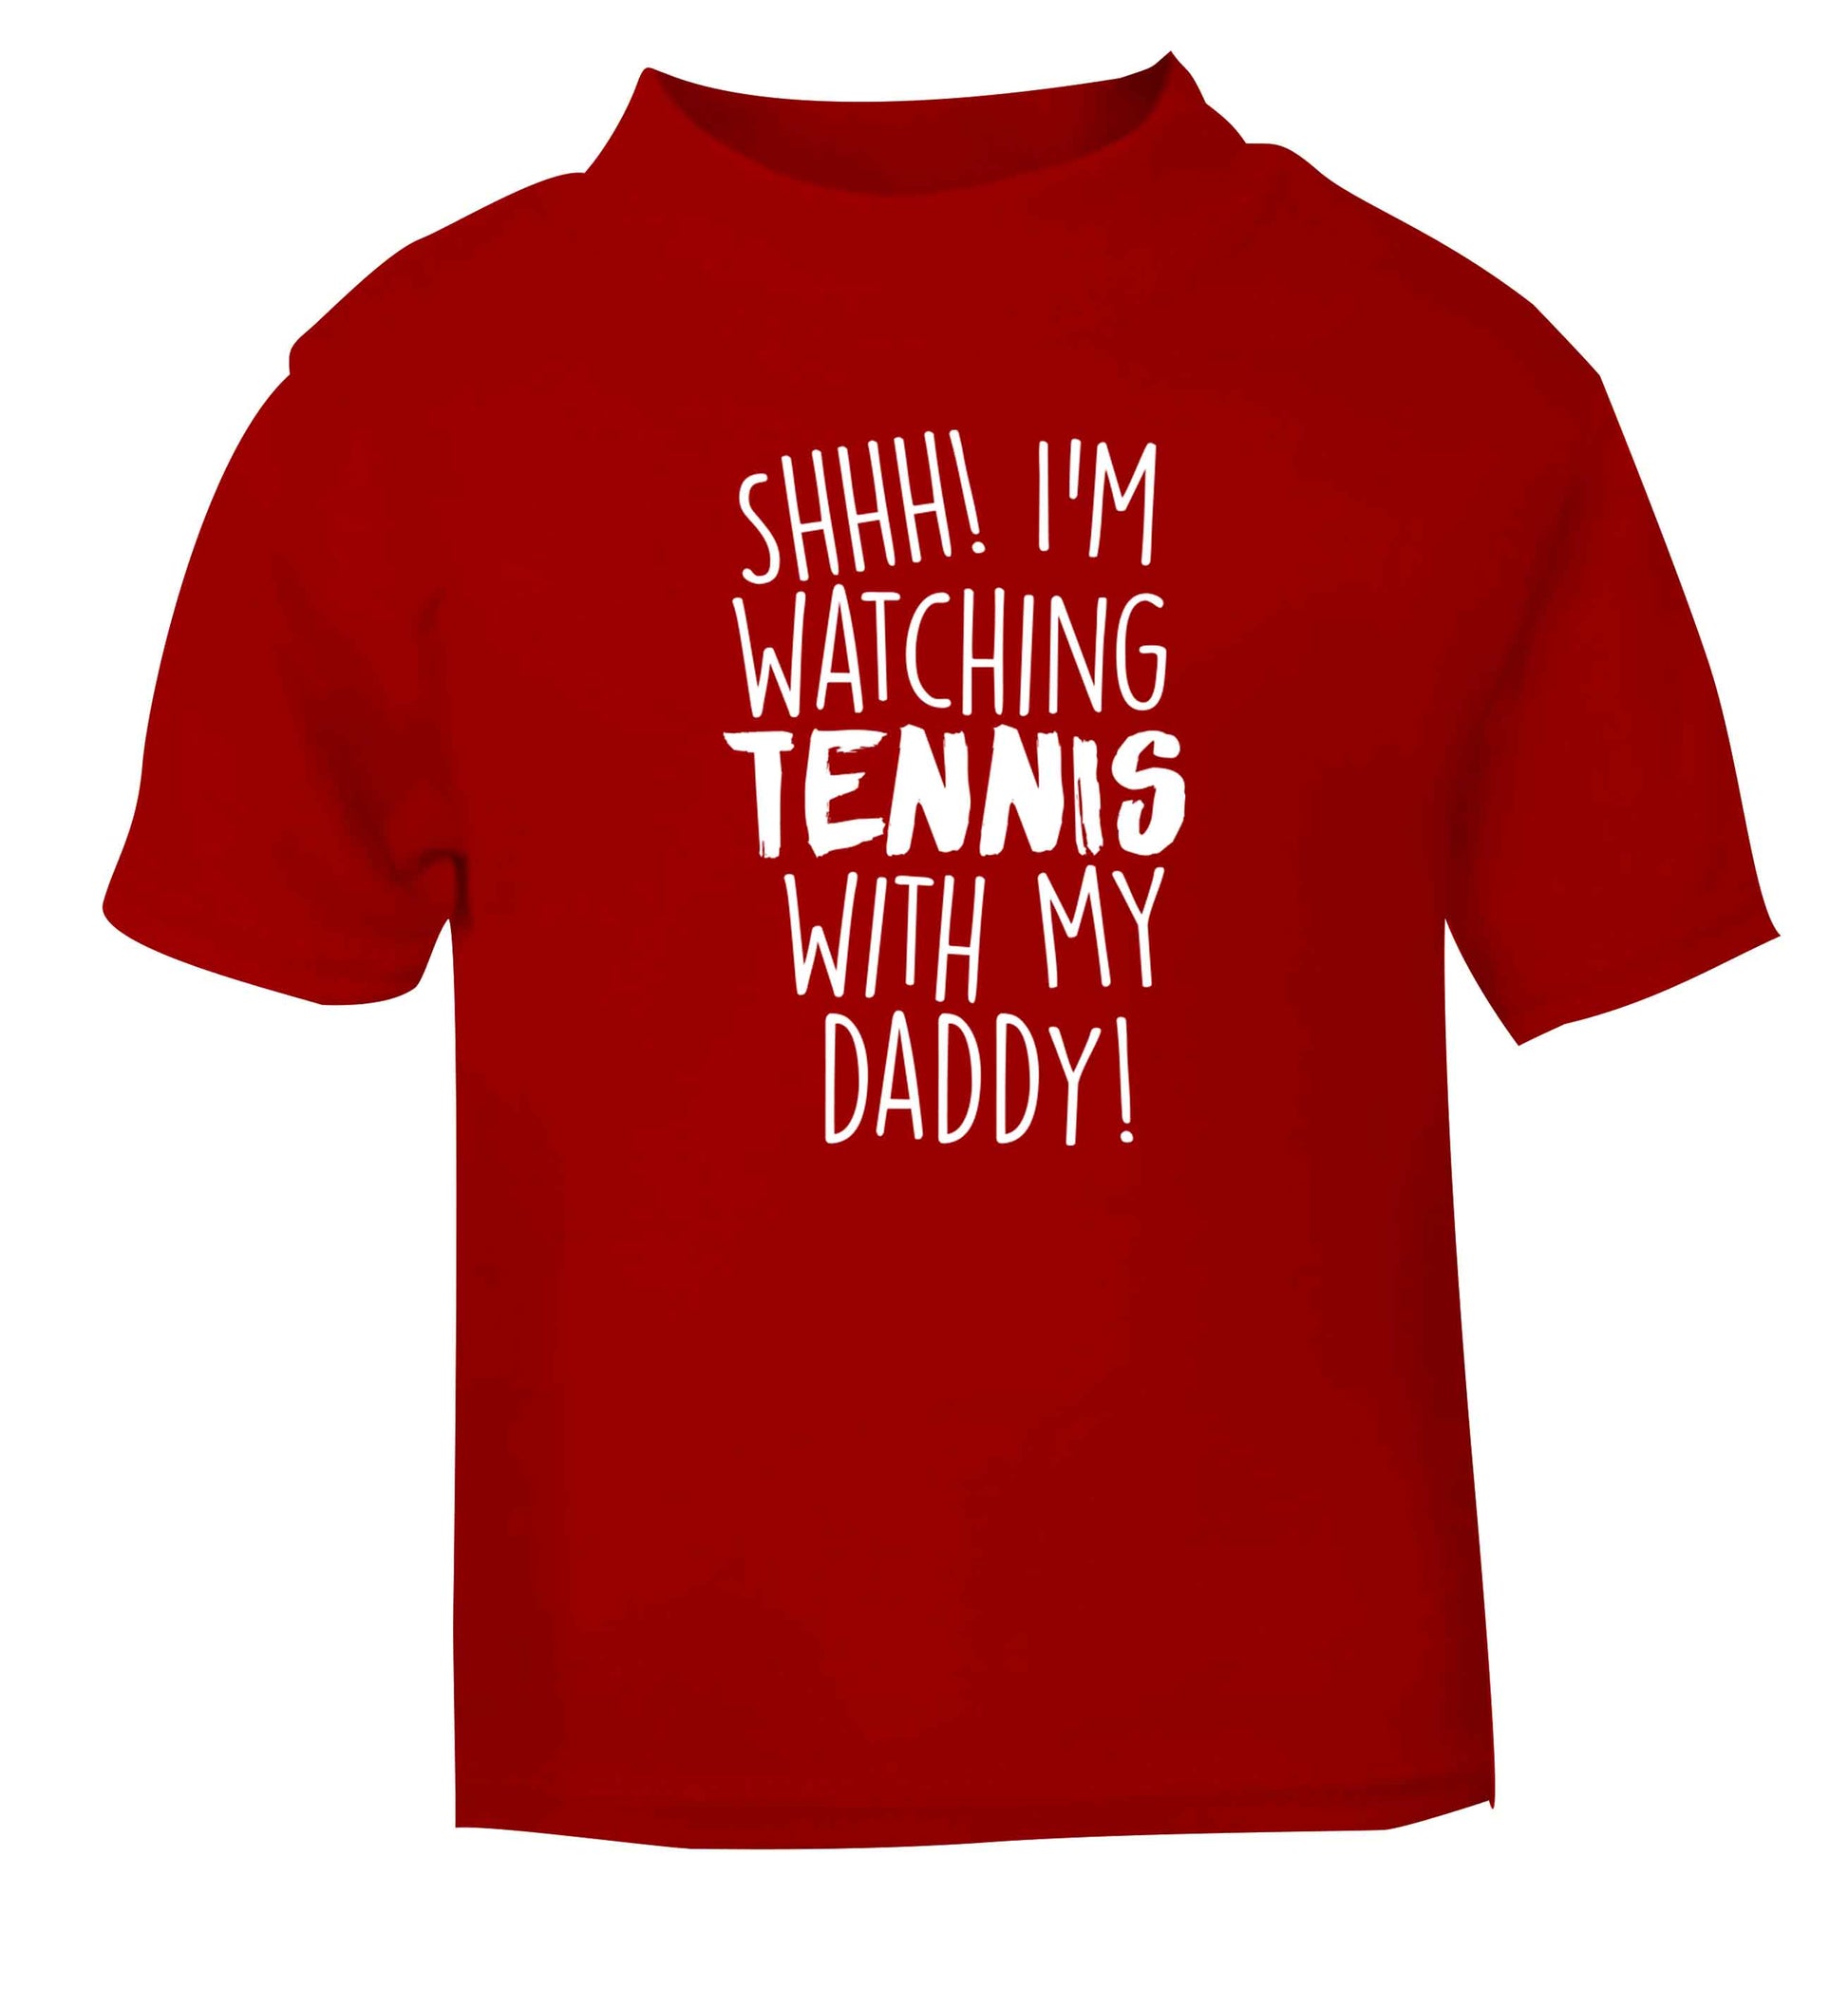 Shh! I'm watching tennis with my daddy! red Baby Toddler Tshirt 2 Years